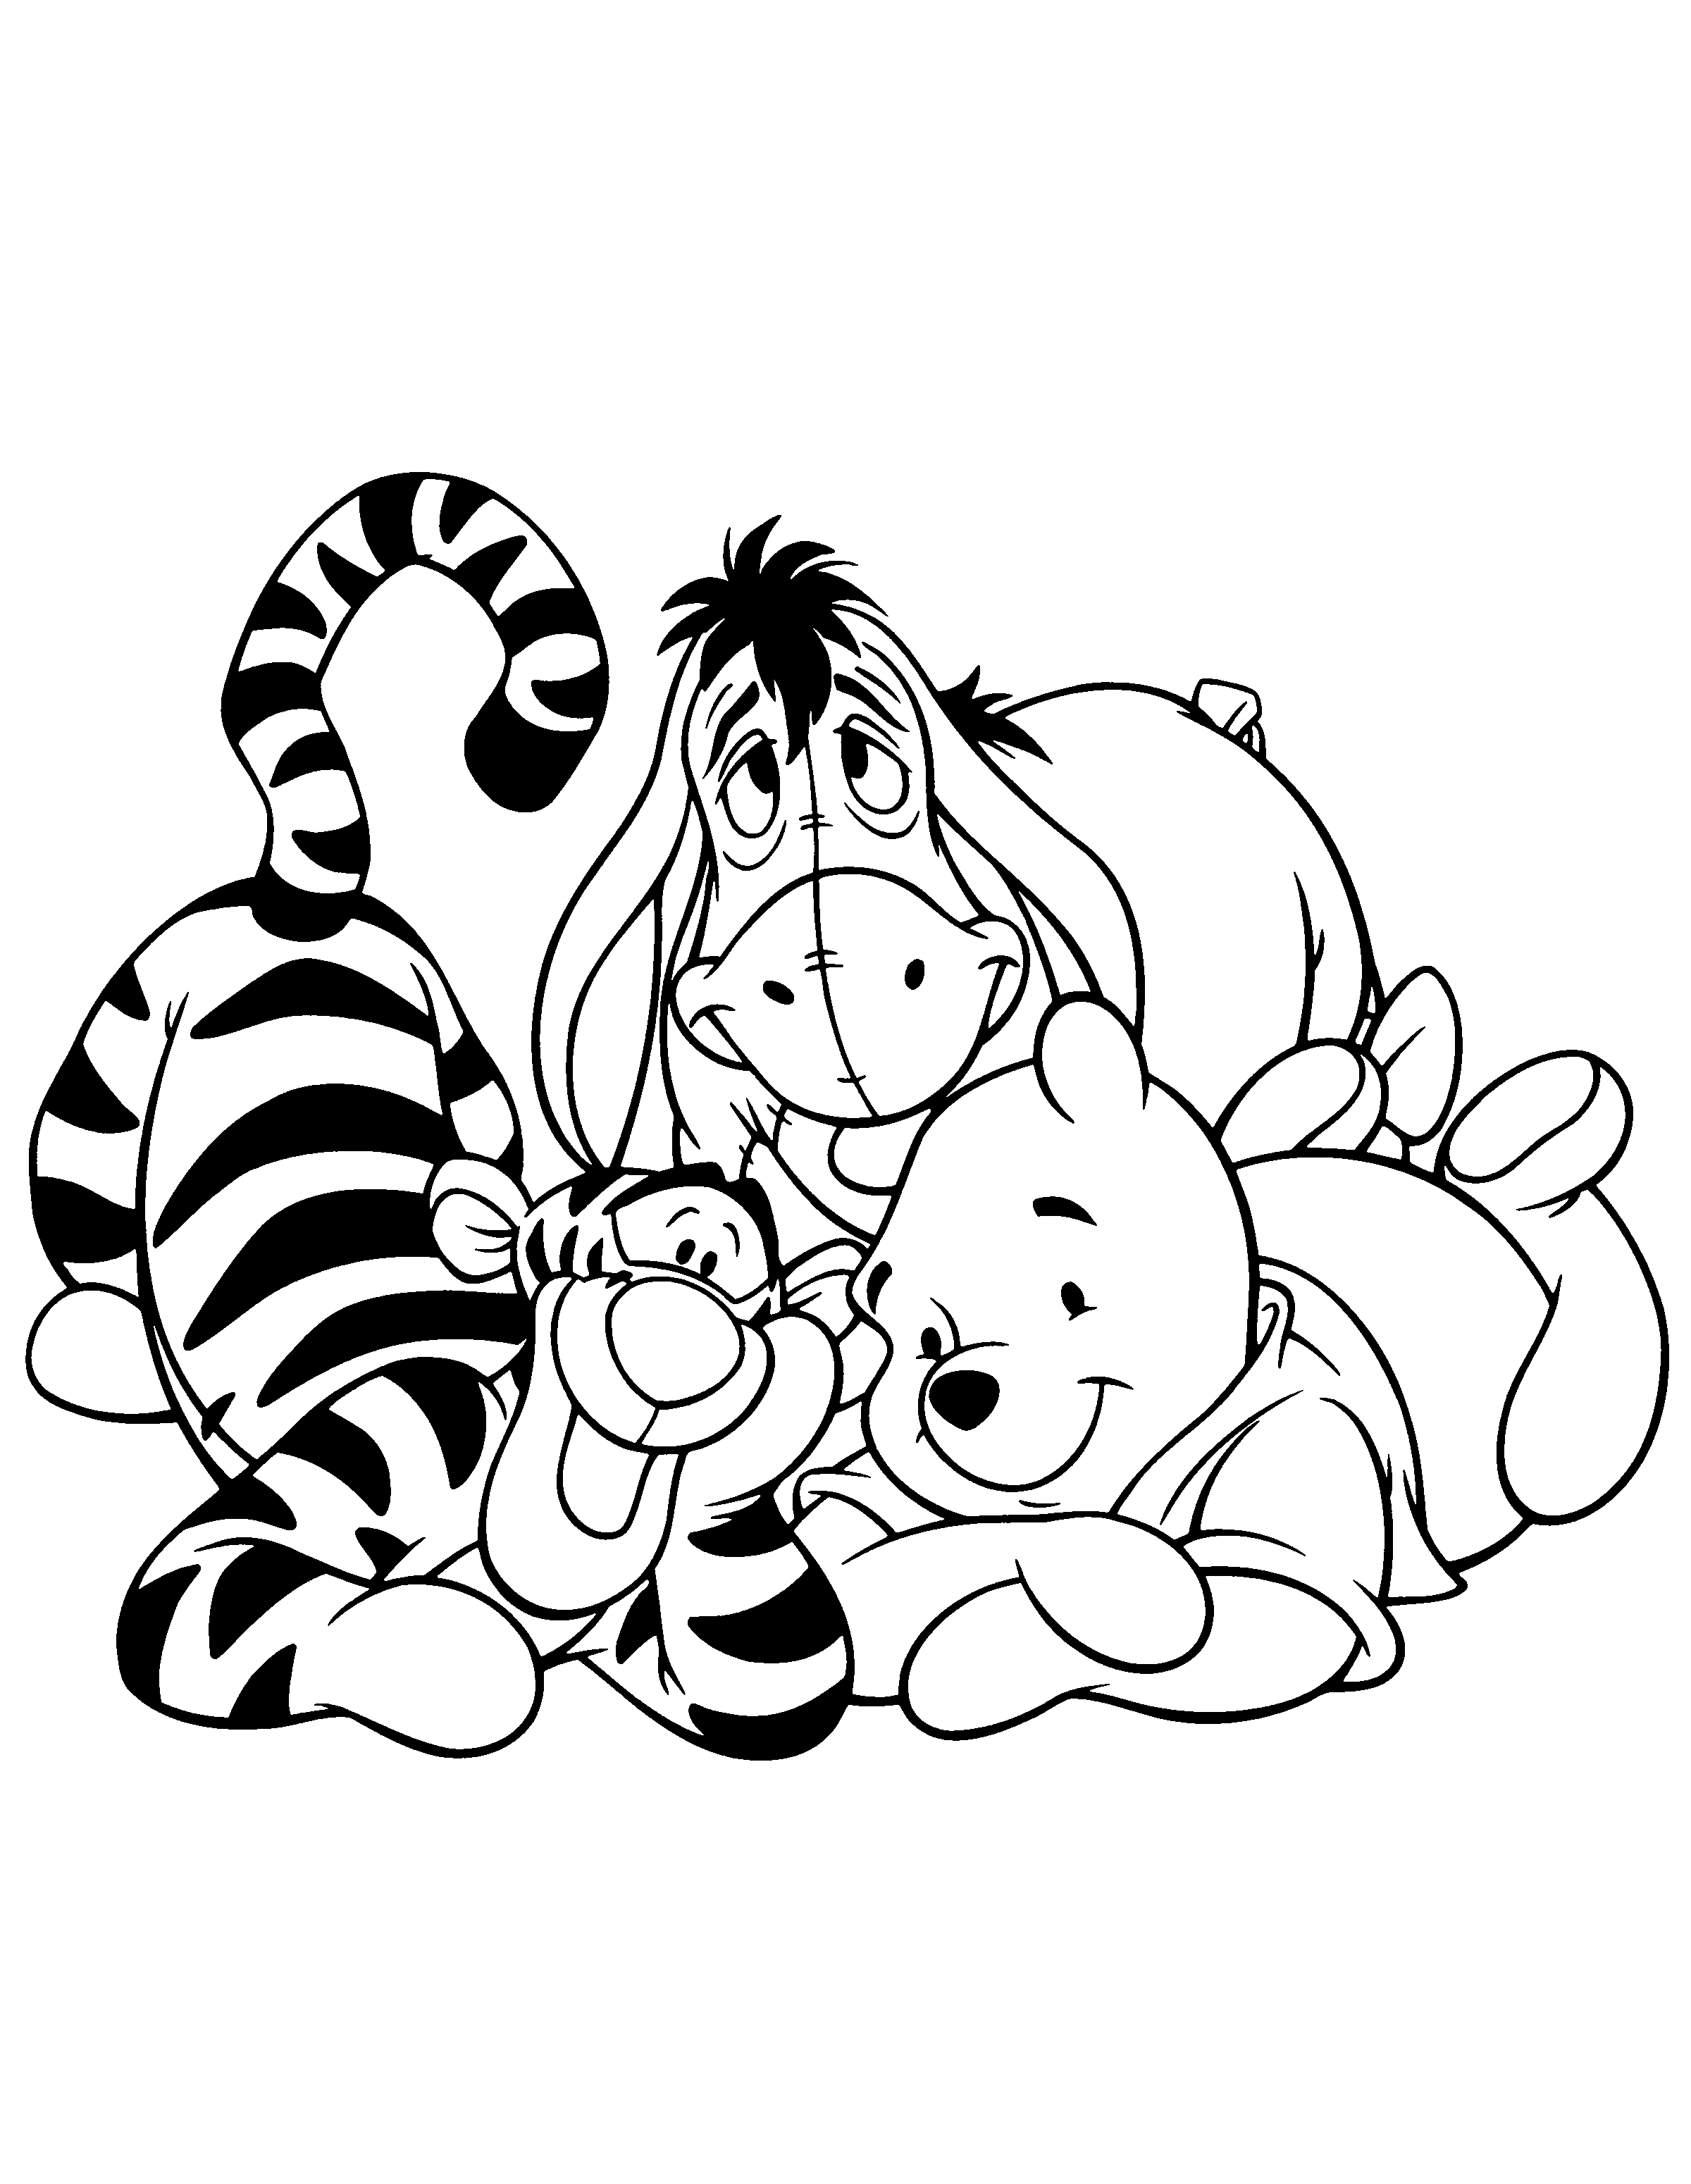 Winnie The Pooh Coloring Pages (3)  Coloring Kids